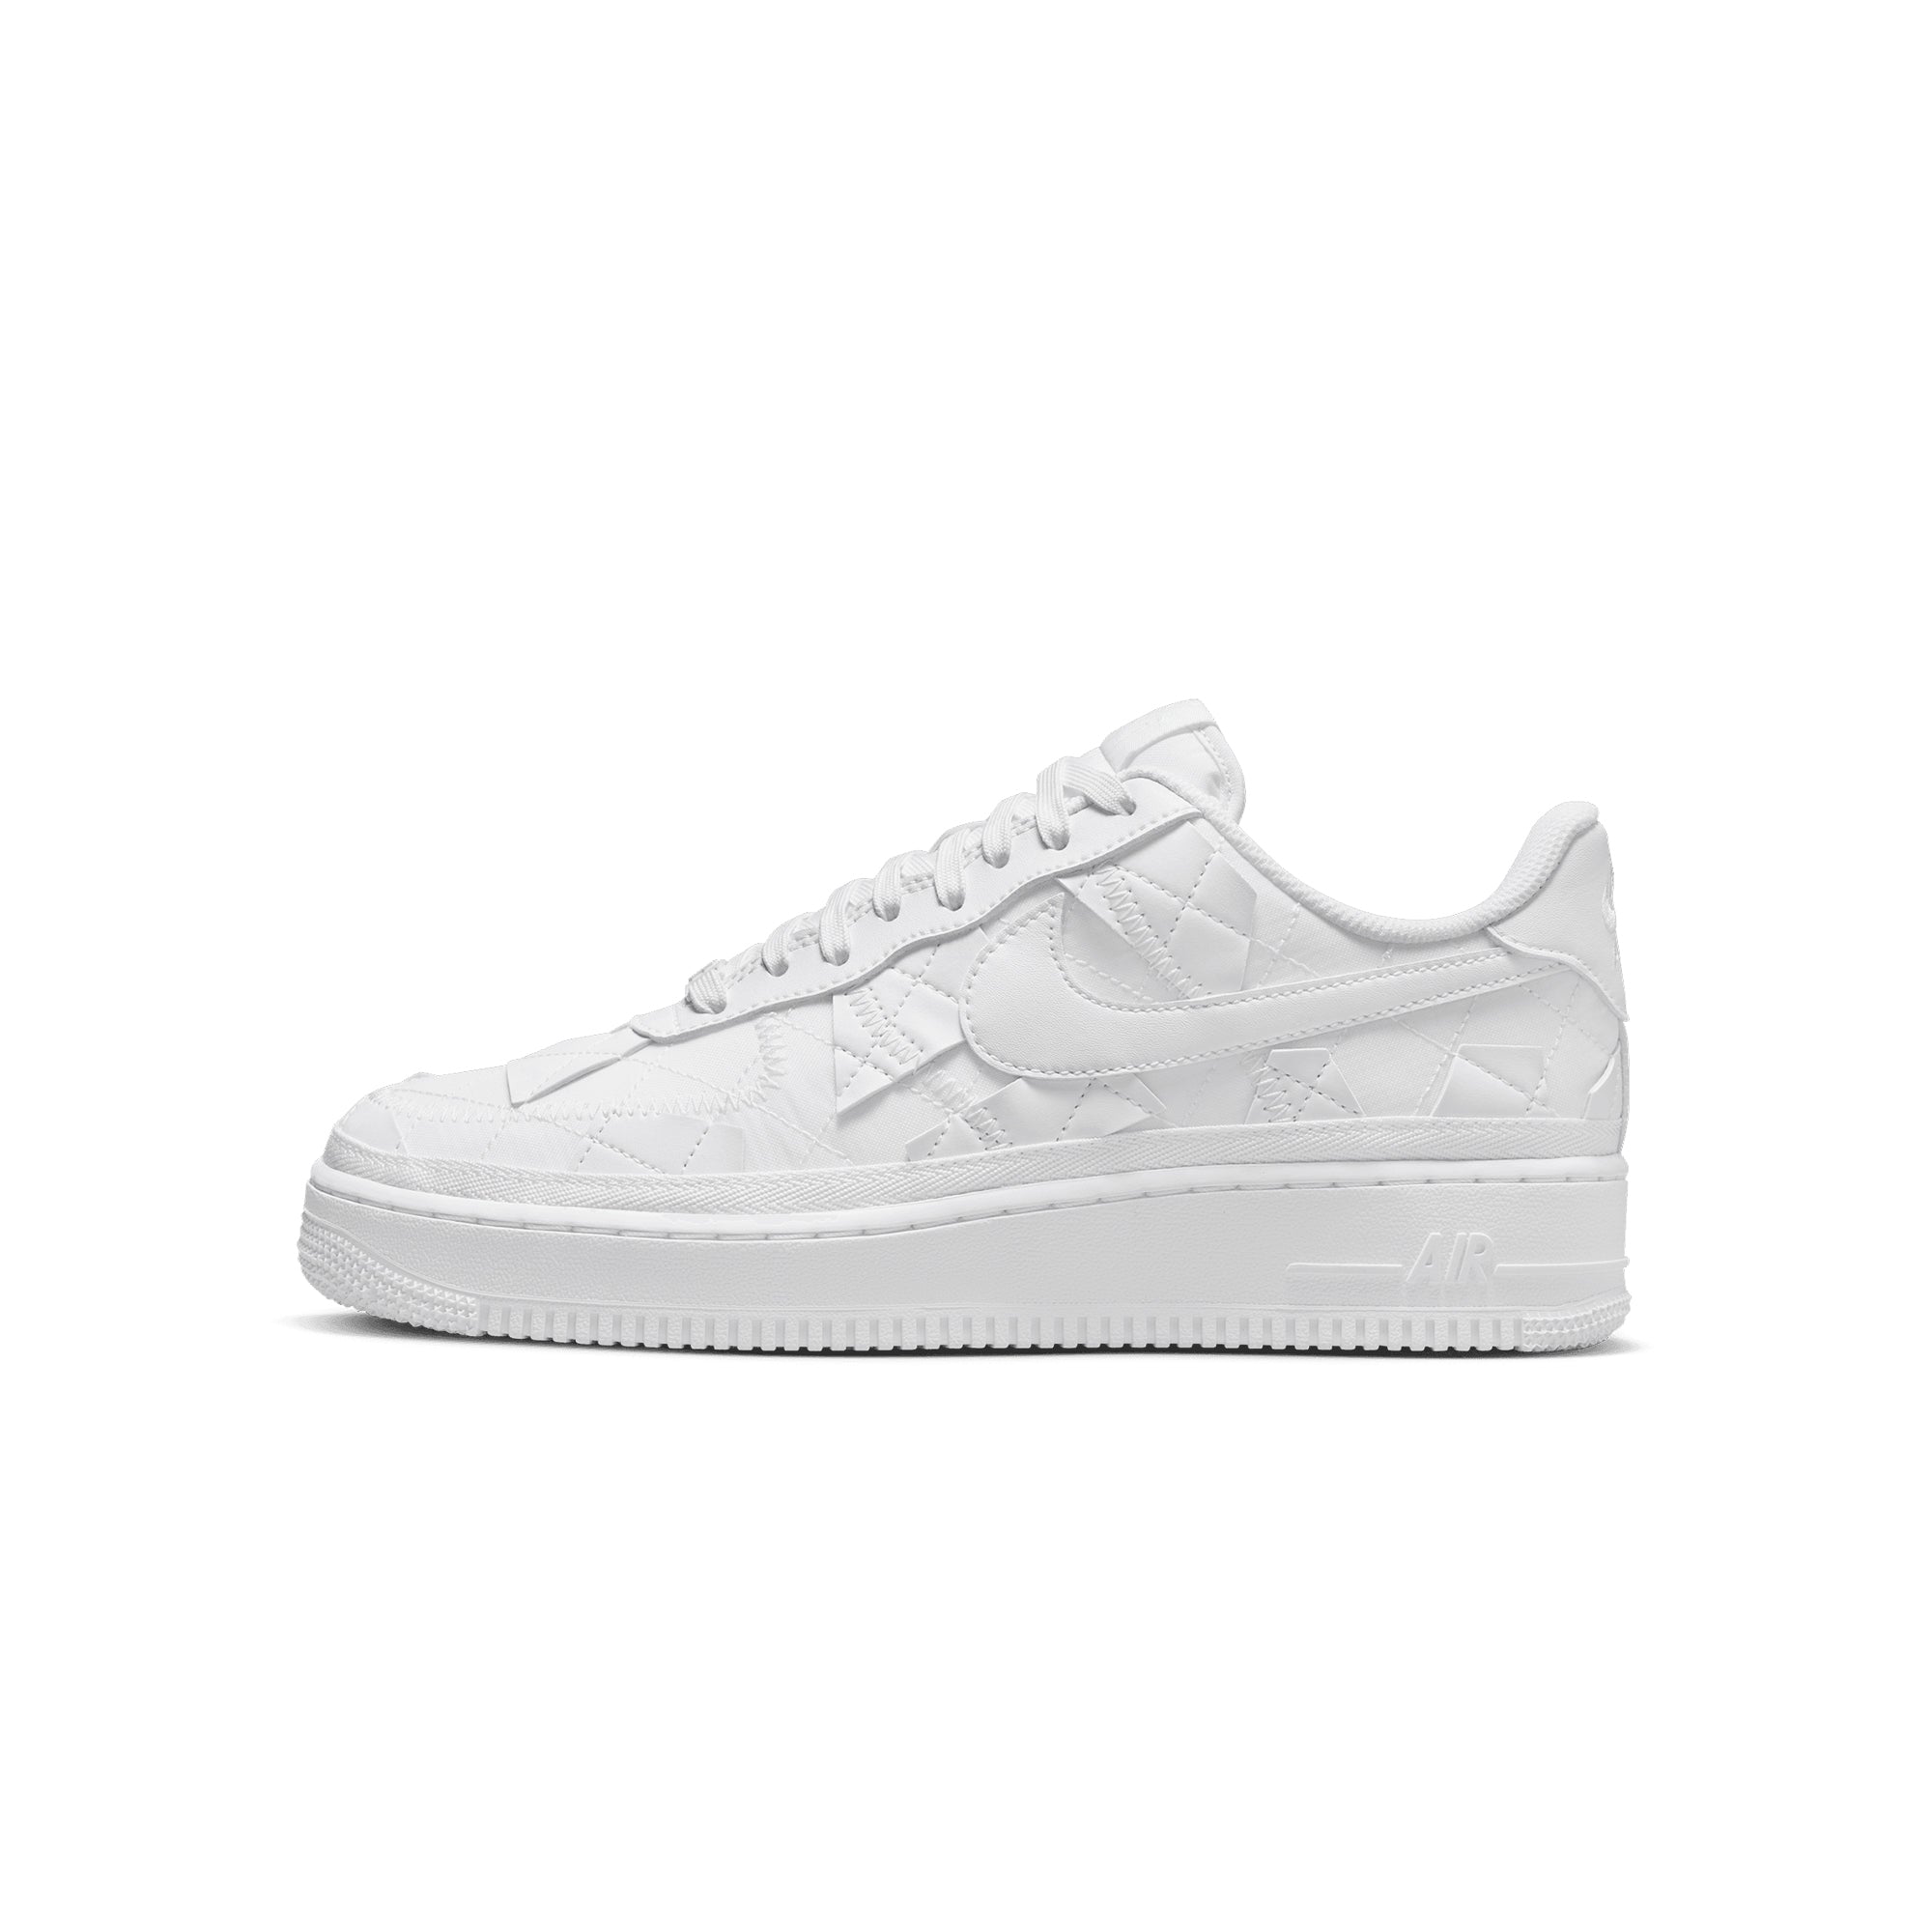 Nike Mens Air Force 1 Mid '07 Shoes – Extra Butter